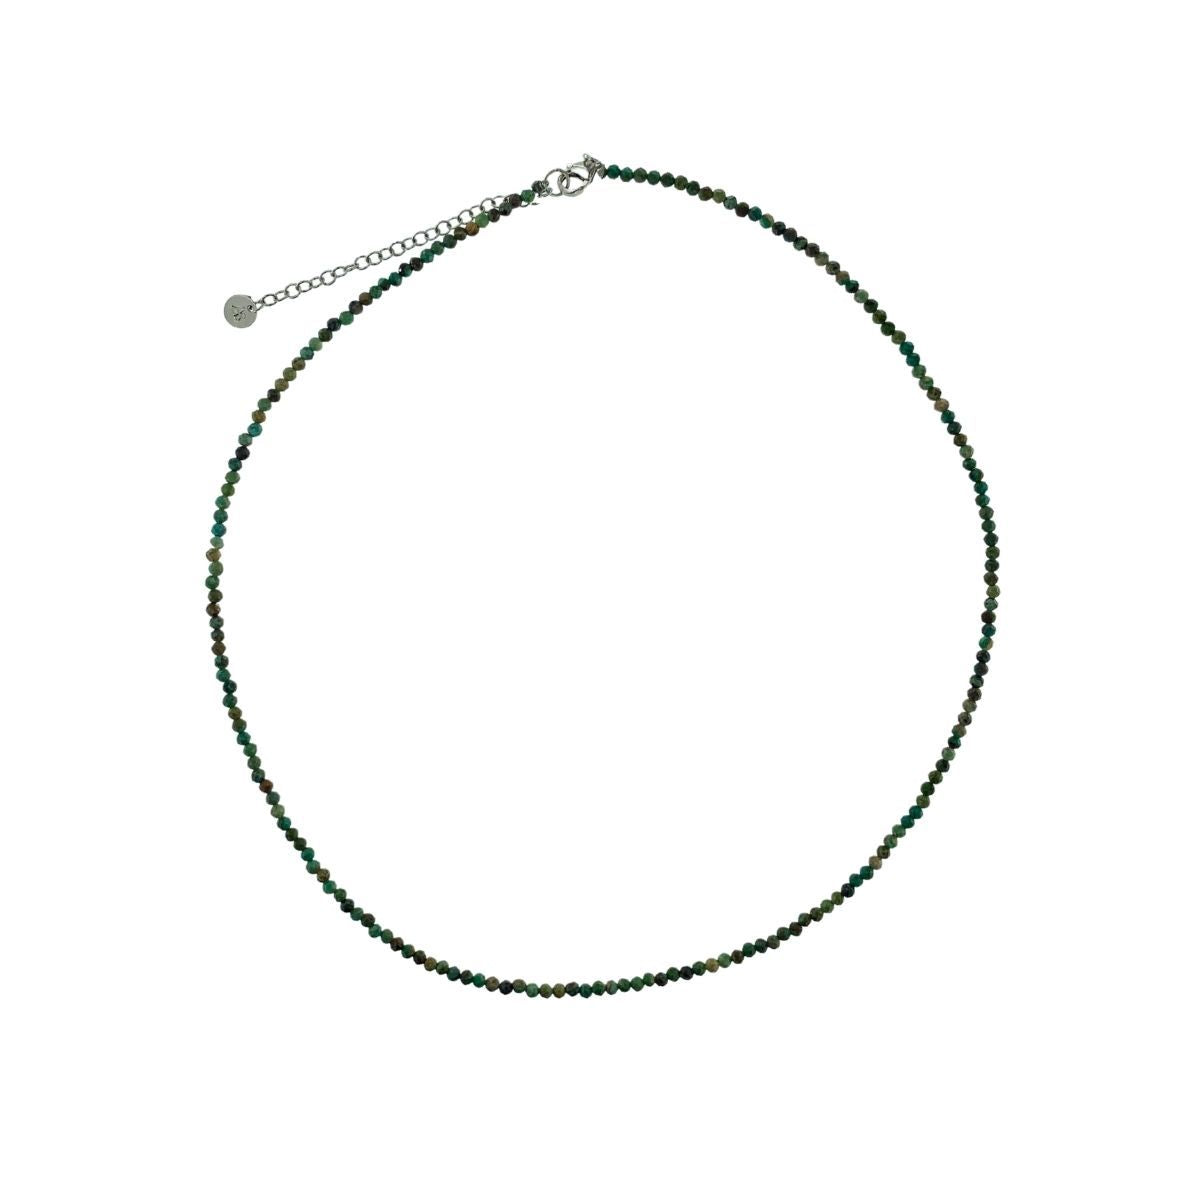 TURQUOISE NECKLACE WITH SILVER CLASP